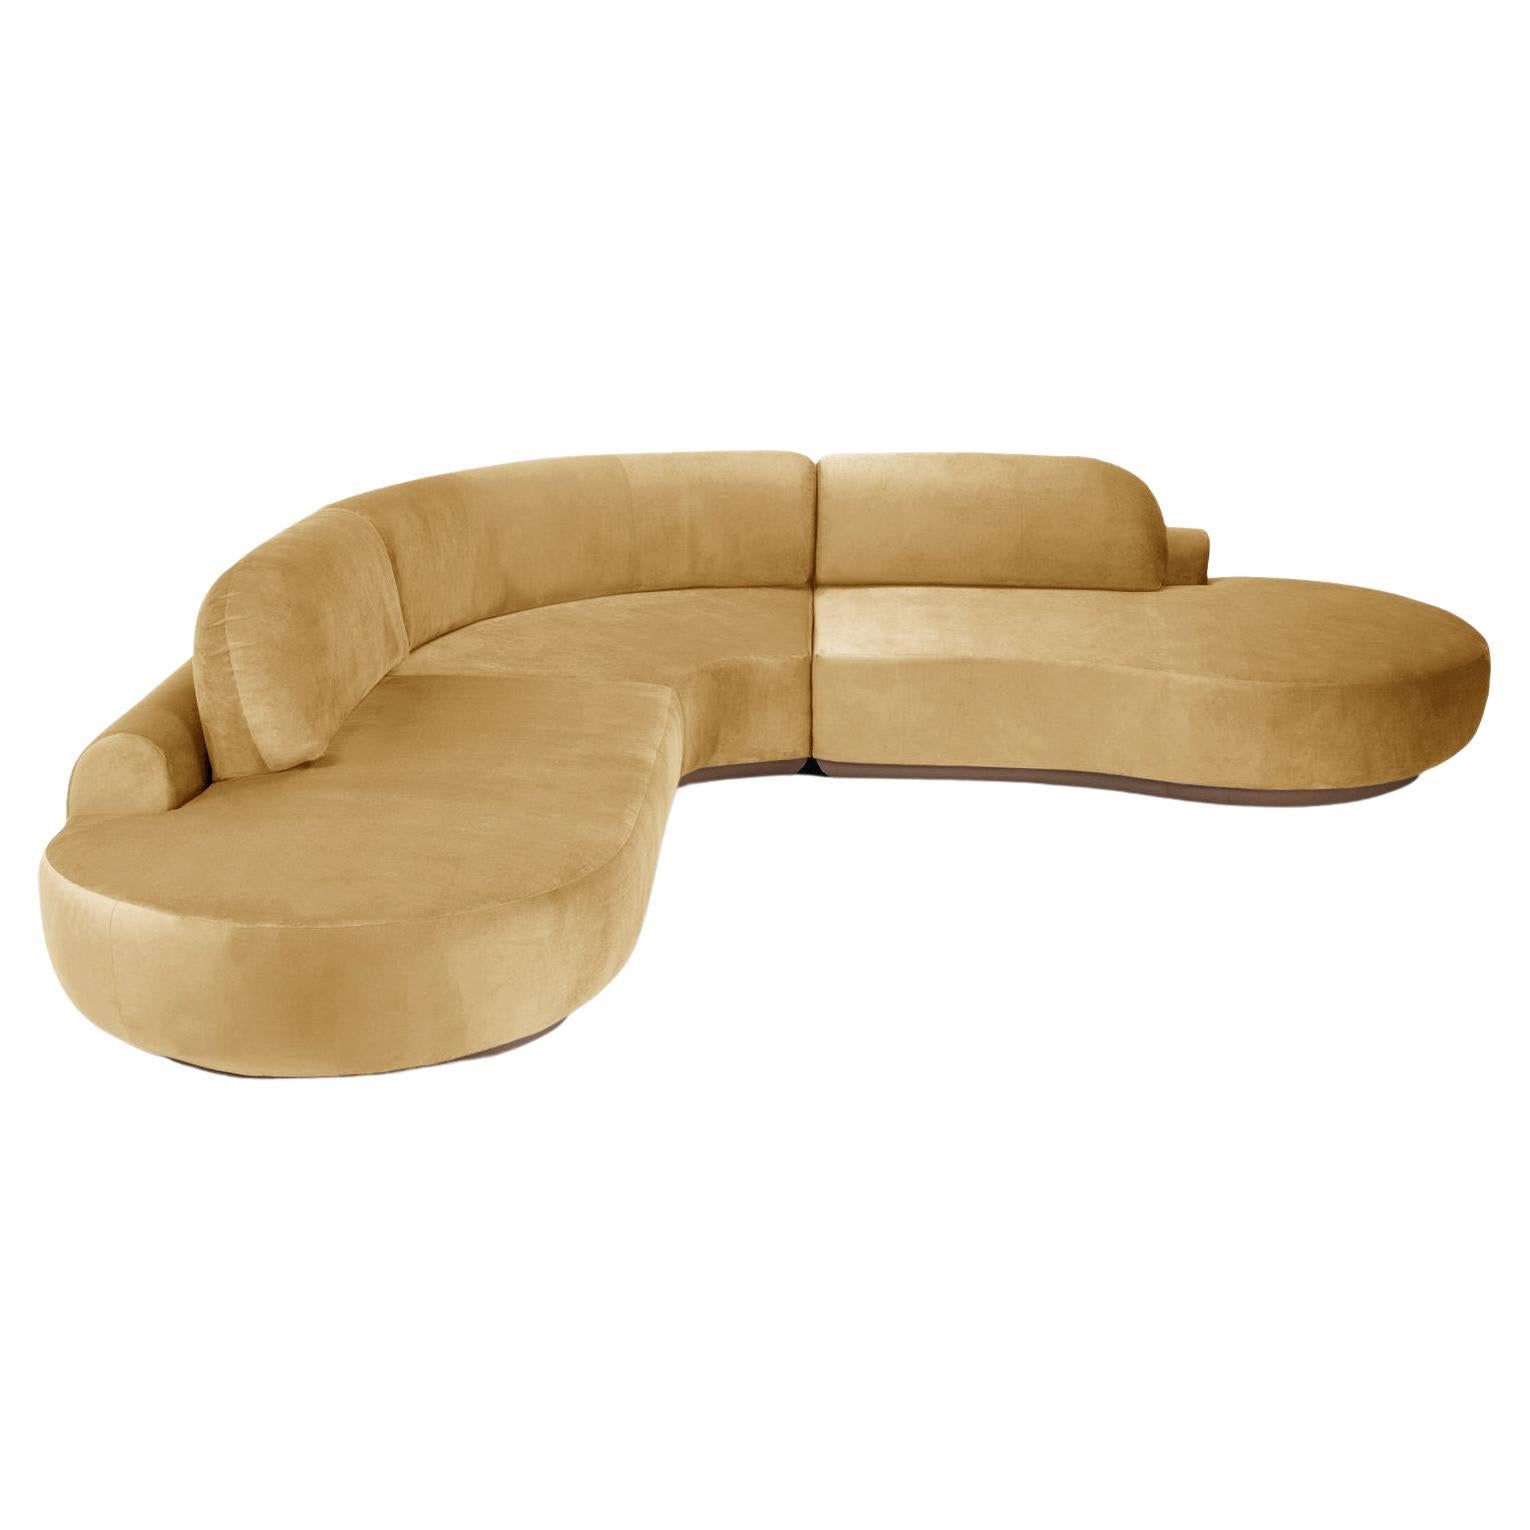 Naked Curved Sectional Sofa, 3 Piece with Beech Ash-056-1 and Vigo Plantain For Sale